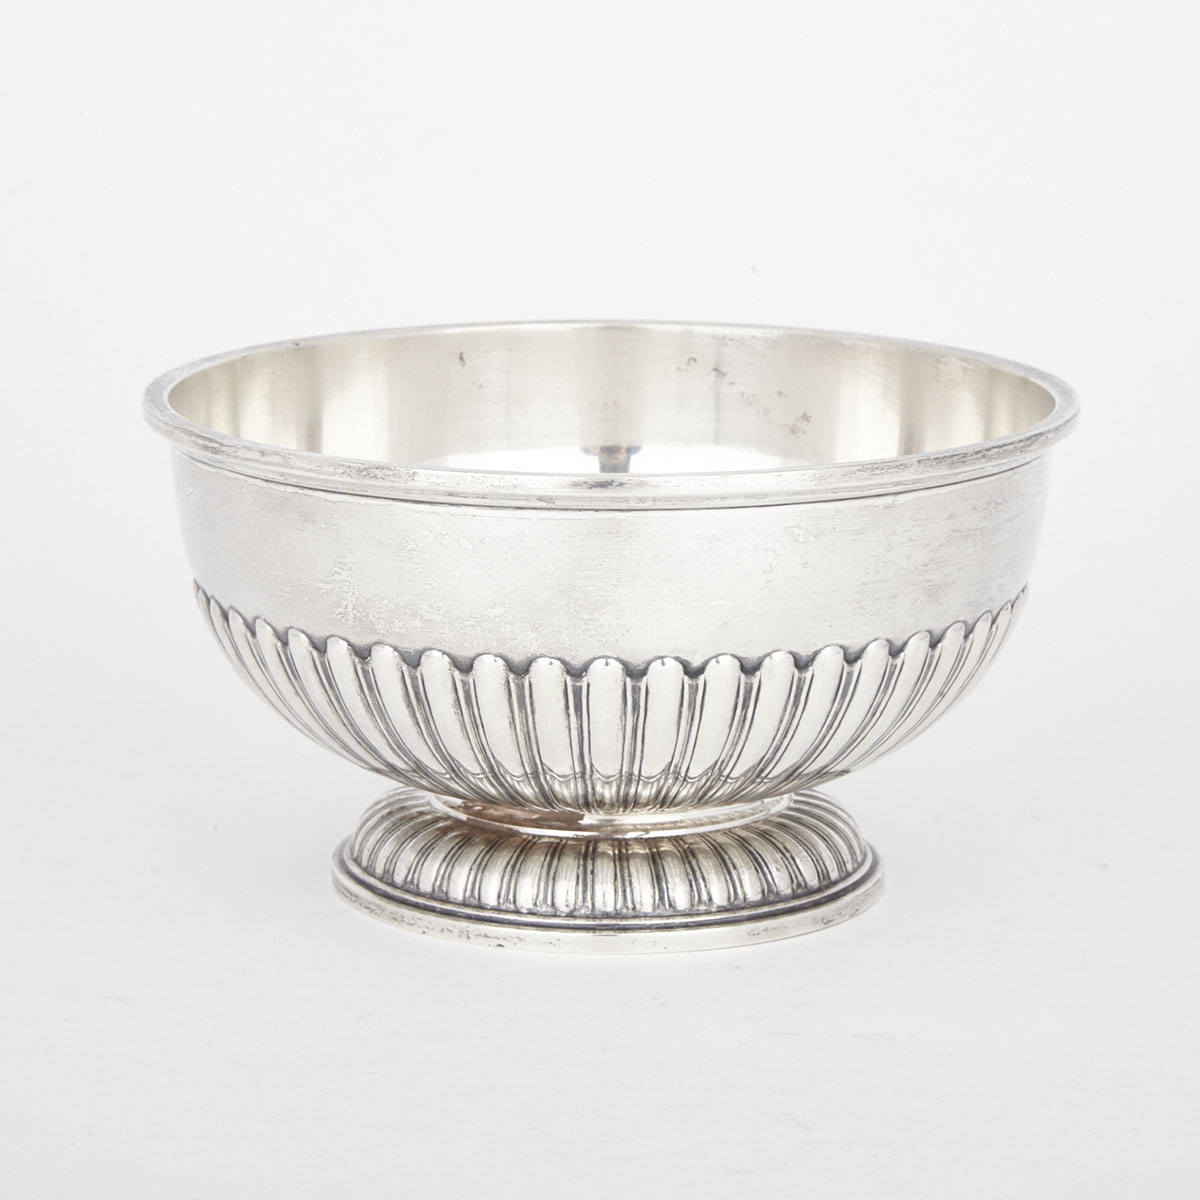 Canadian Silver Footed Bowl, Henry Birks & Sons, Montreal, Que., 1950